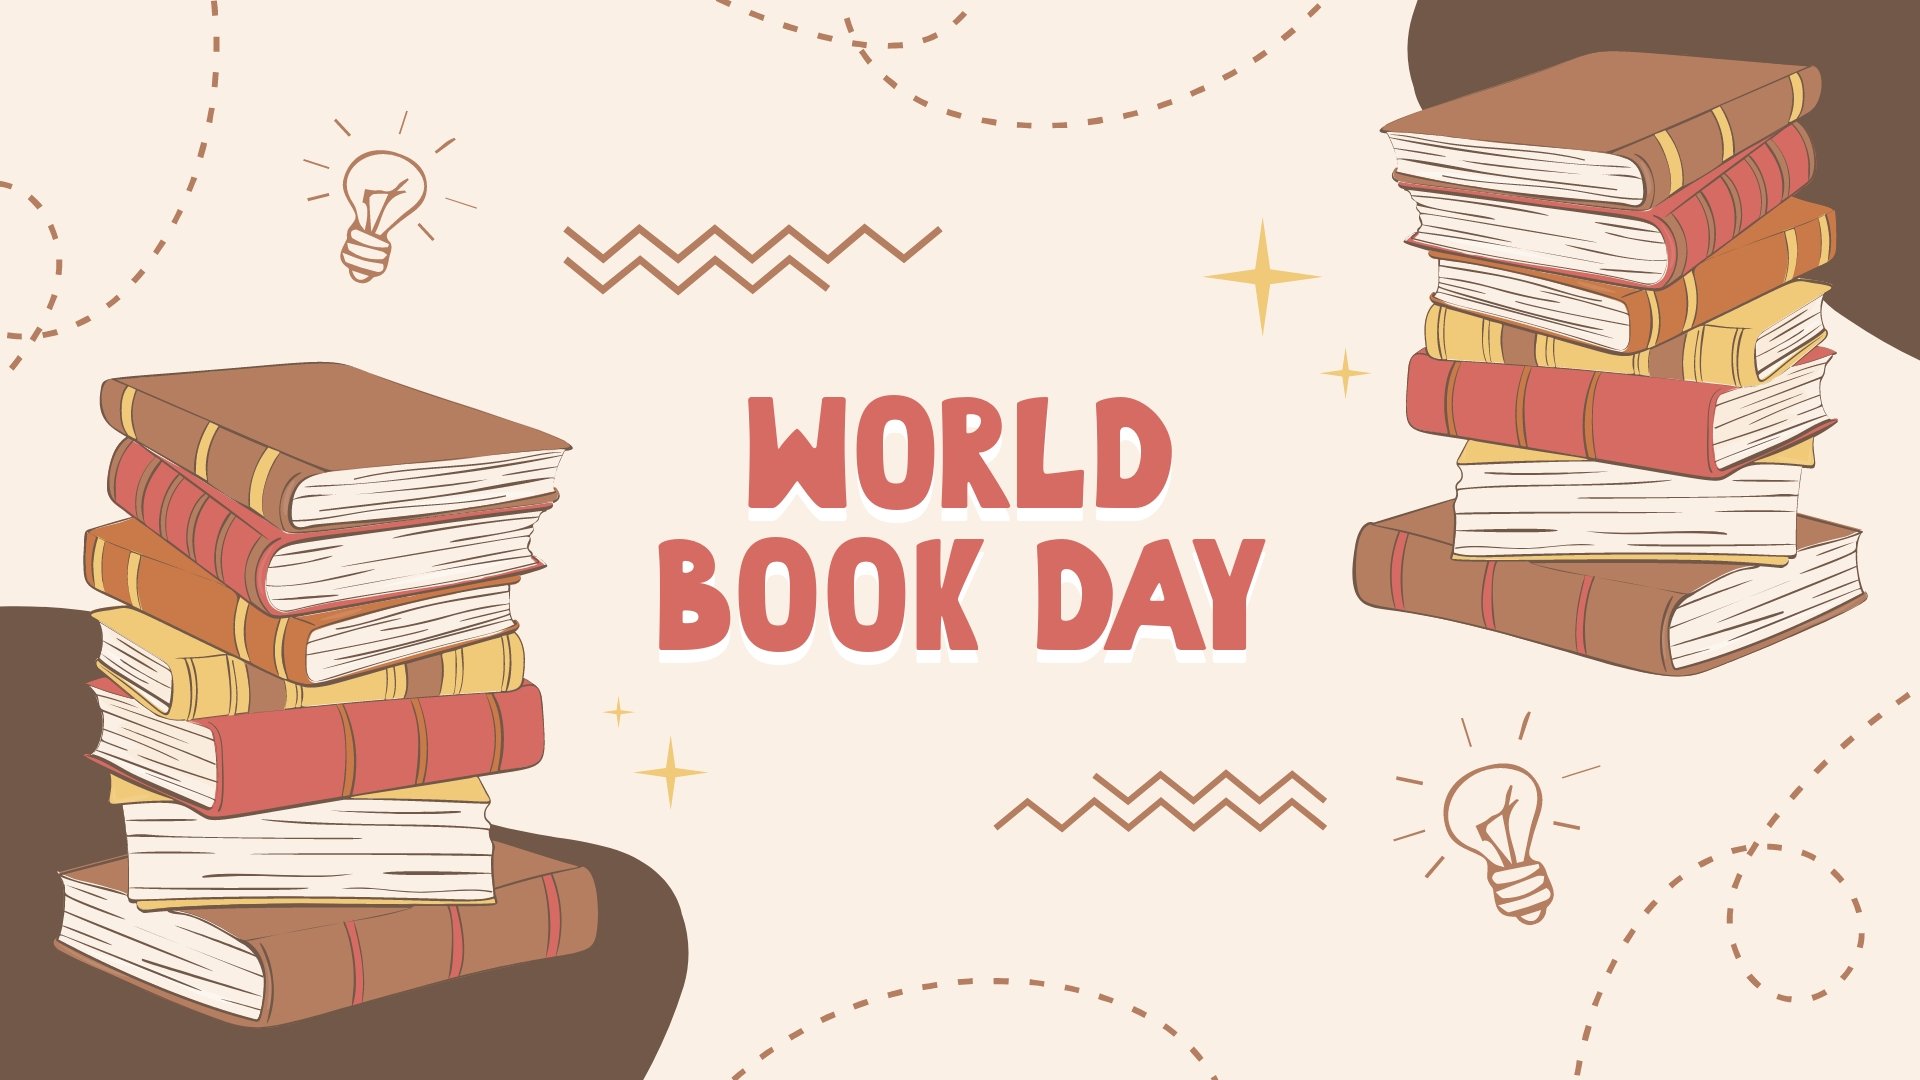 World Book Day Image Template